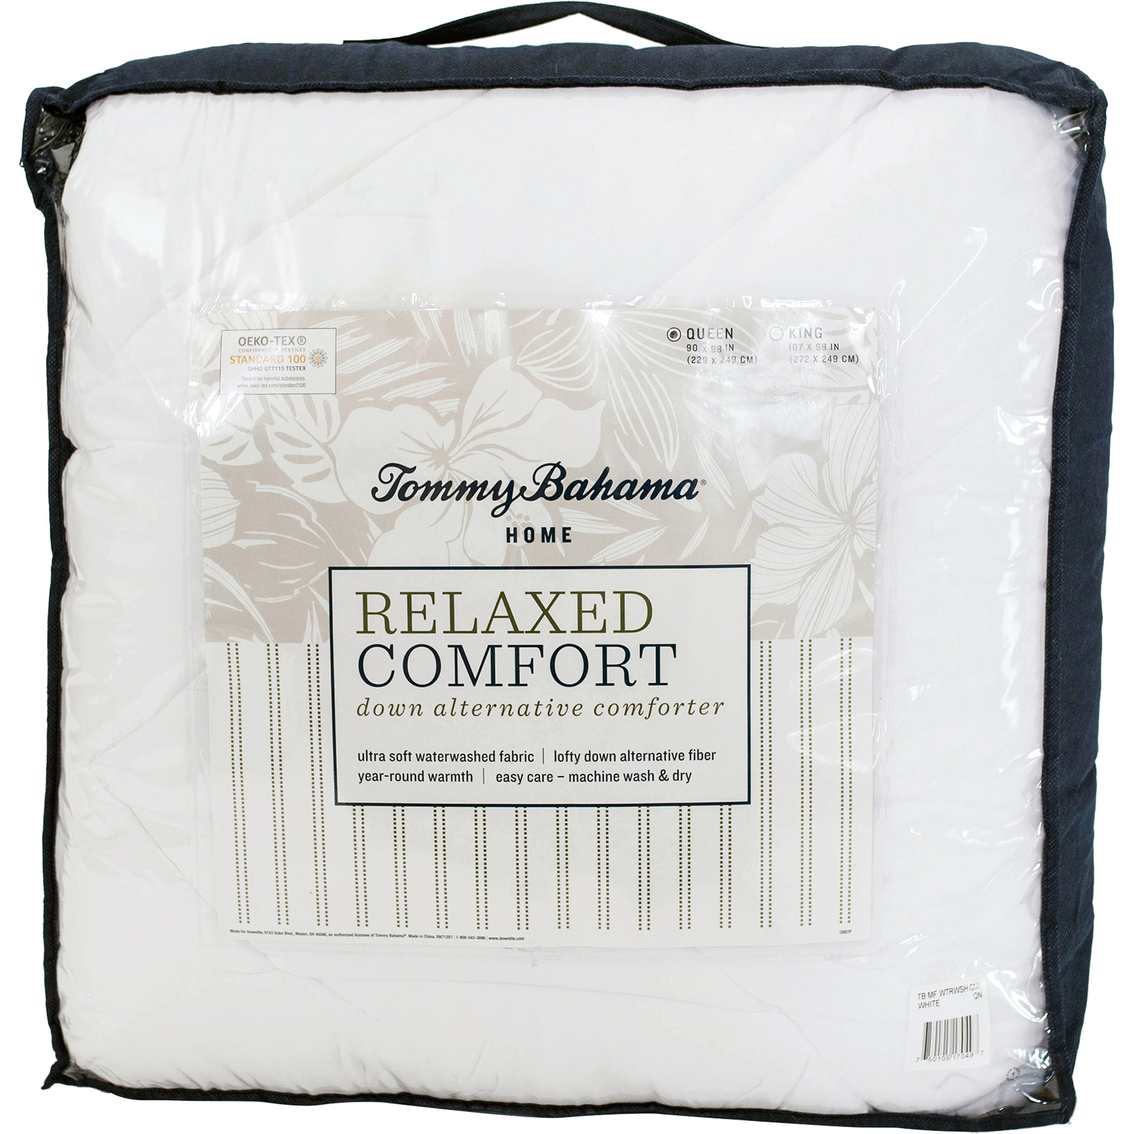 Tommy Bahama Relaxed Comfort Butter Soft Down Alternative Comforter - Image 4 of 5